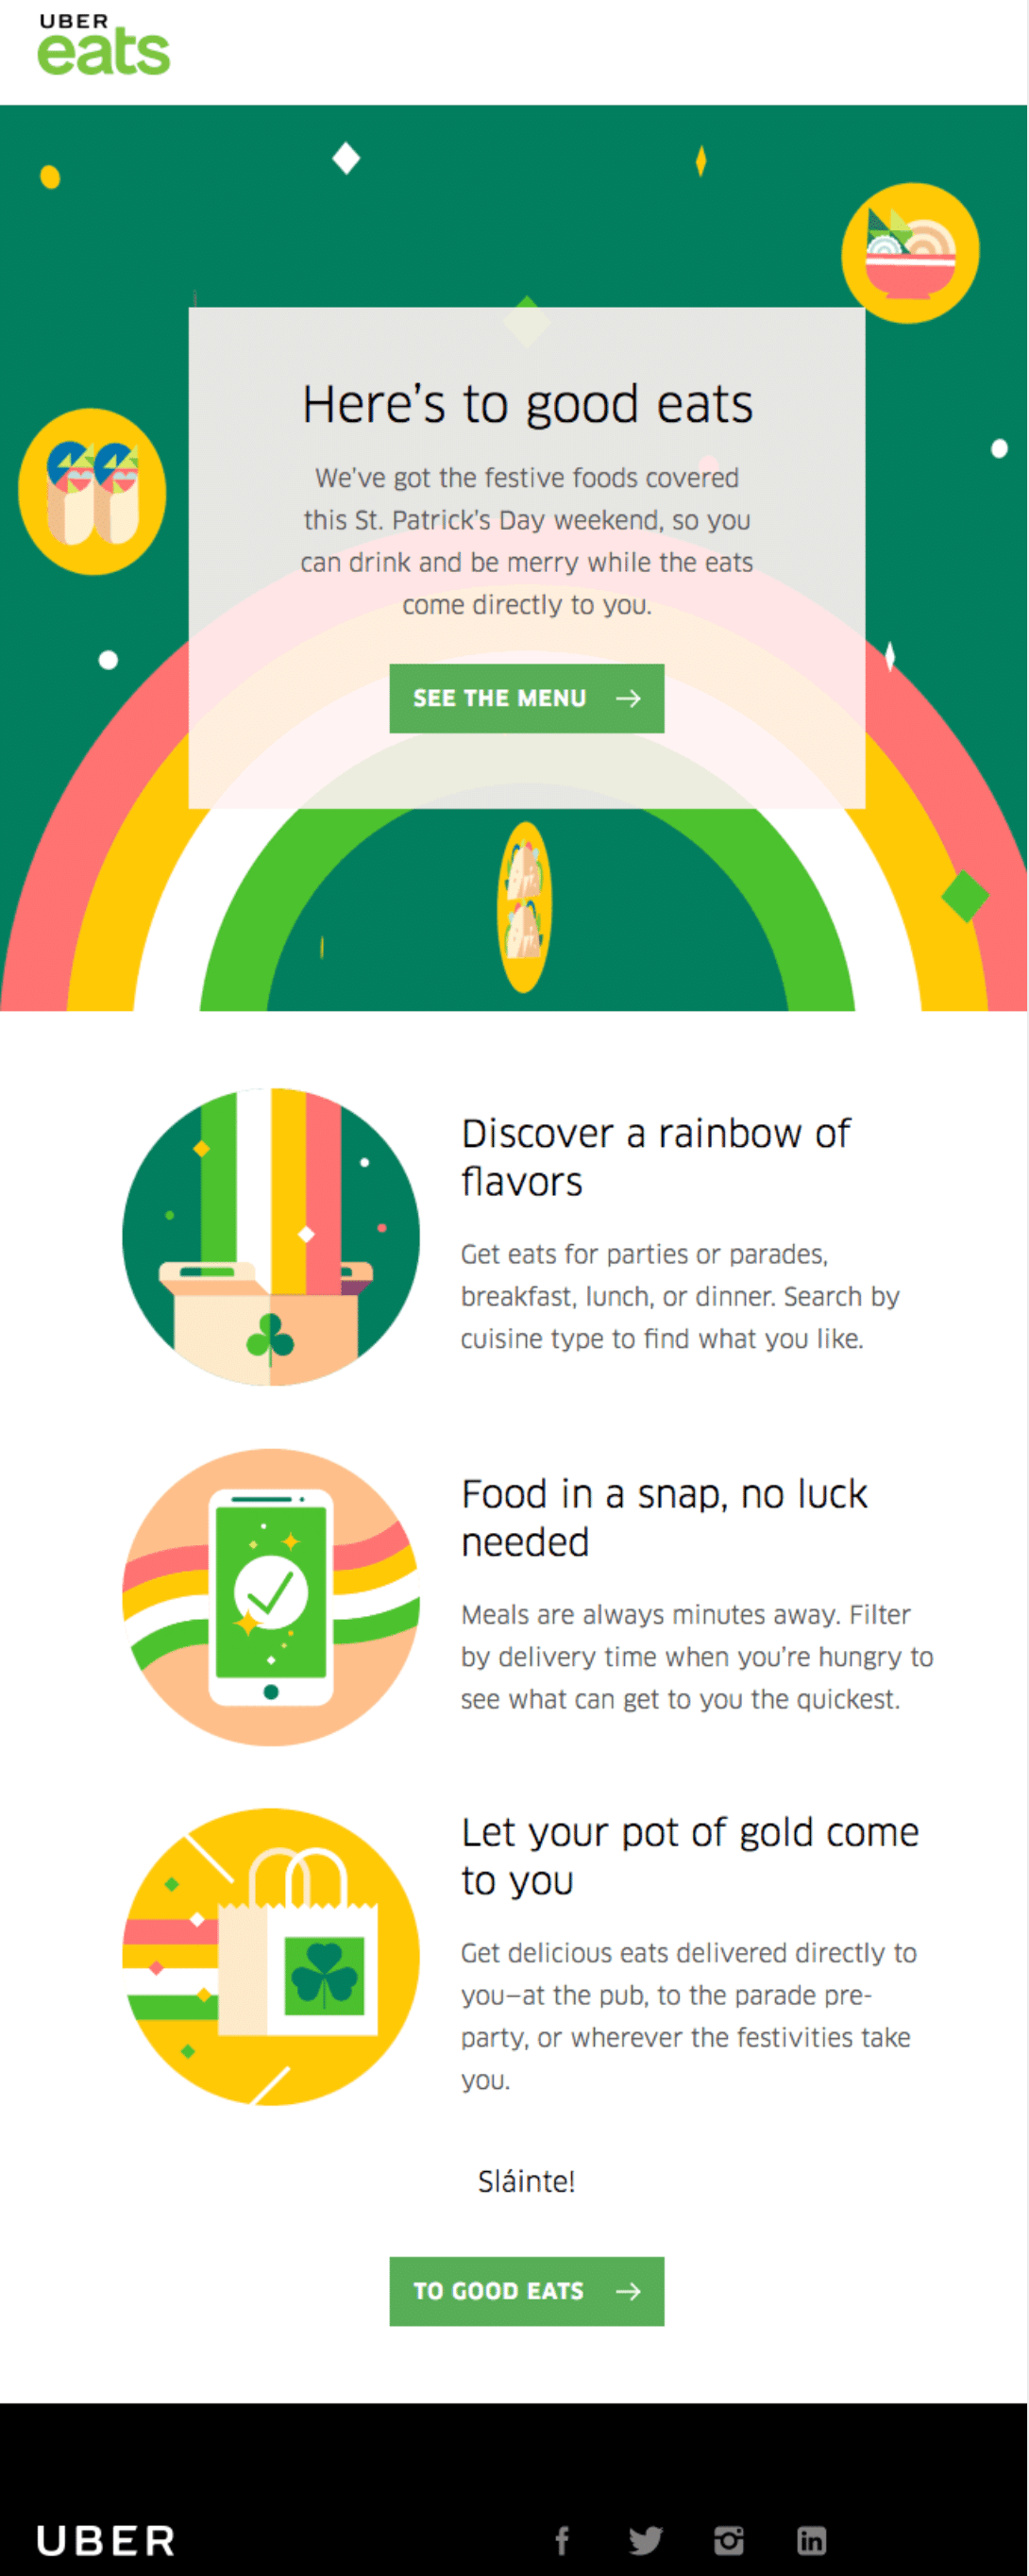 Uber Eats sends a promotional email to celebrate St. Patrick's Day. 